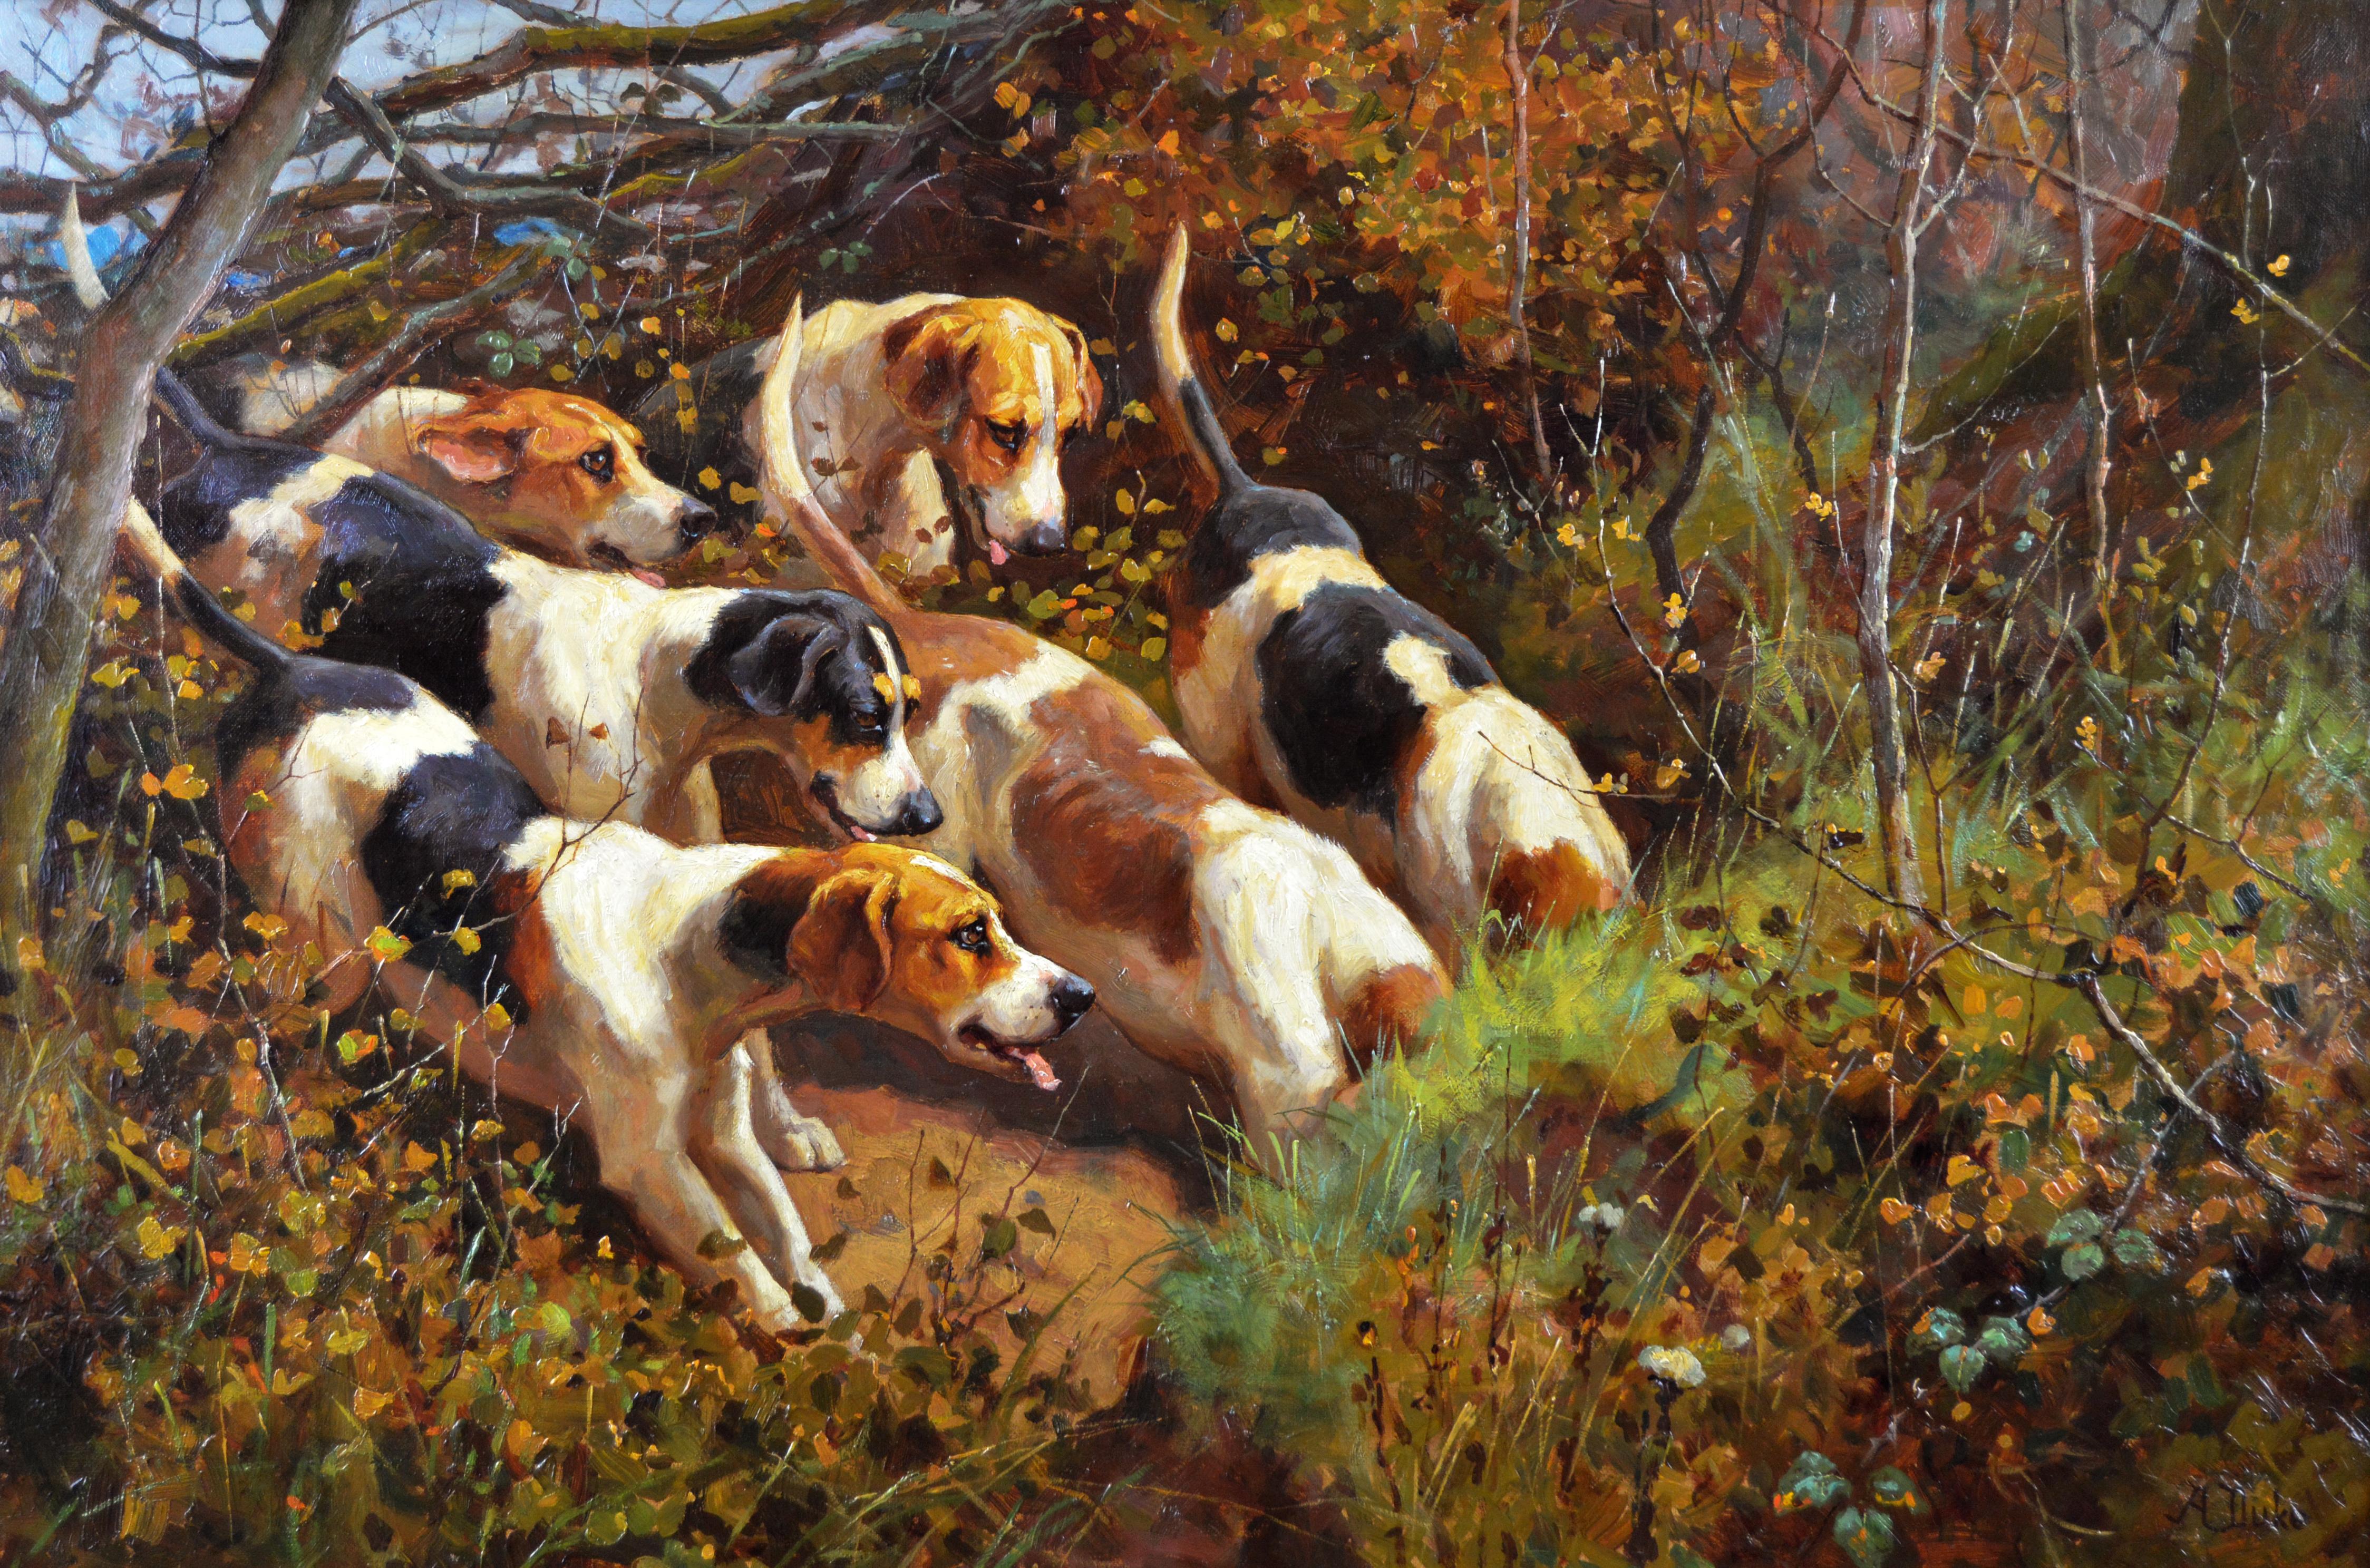 19th Century landscape sporting oil painting of dogs hunting - Painting by Alfred Duke